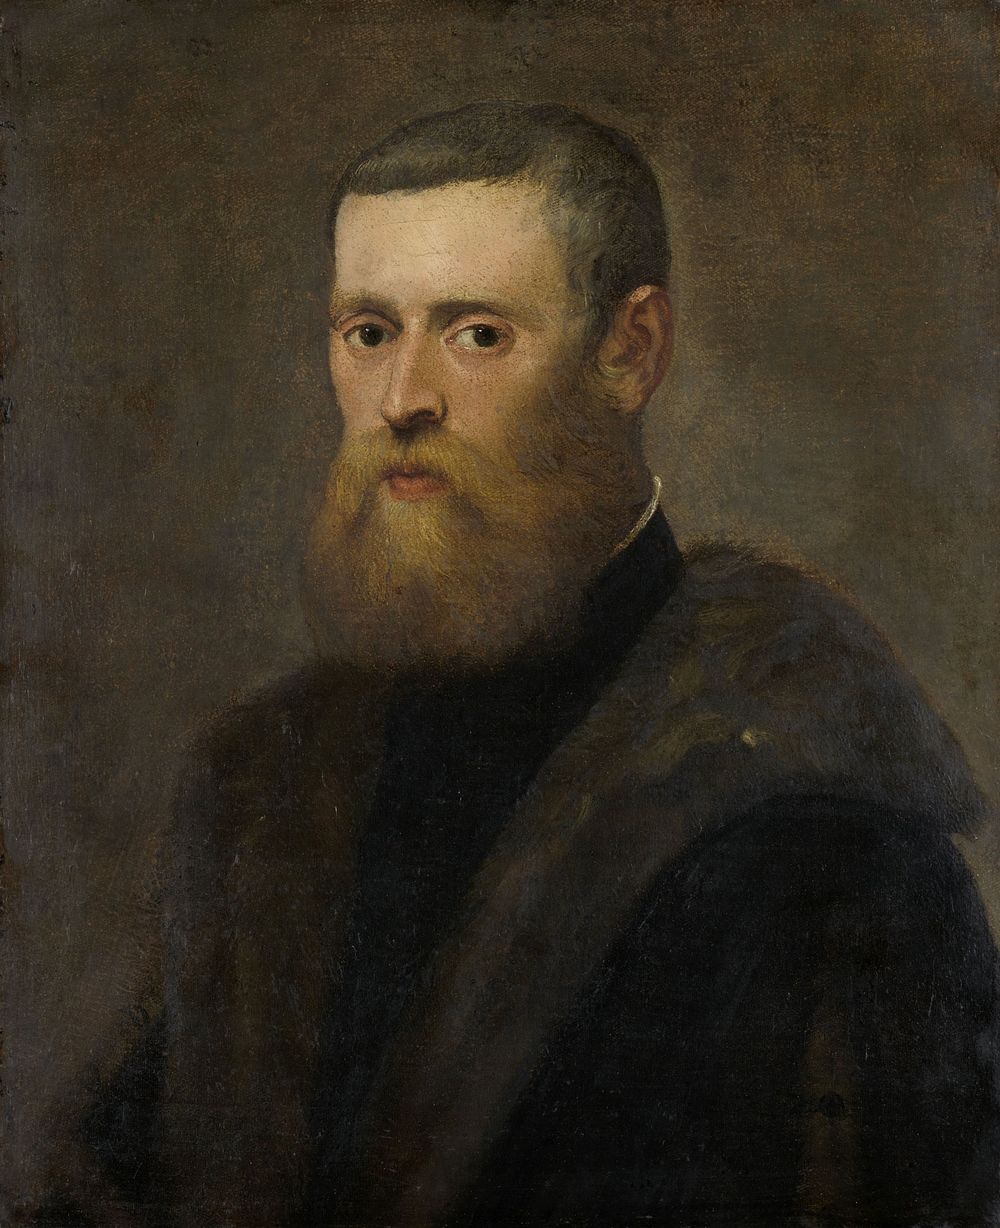 Portrait of a Man (1550 - 1575) by Jacopo Tintoretto